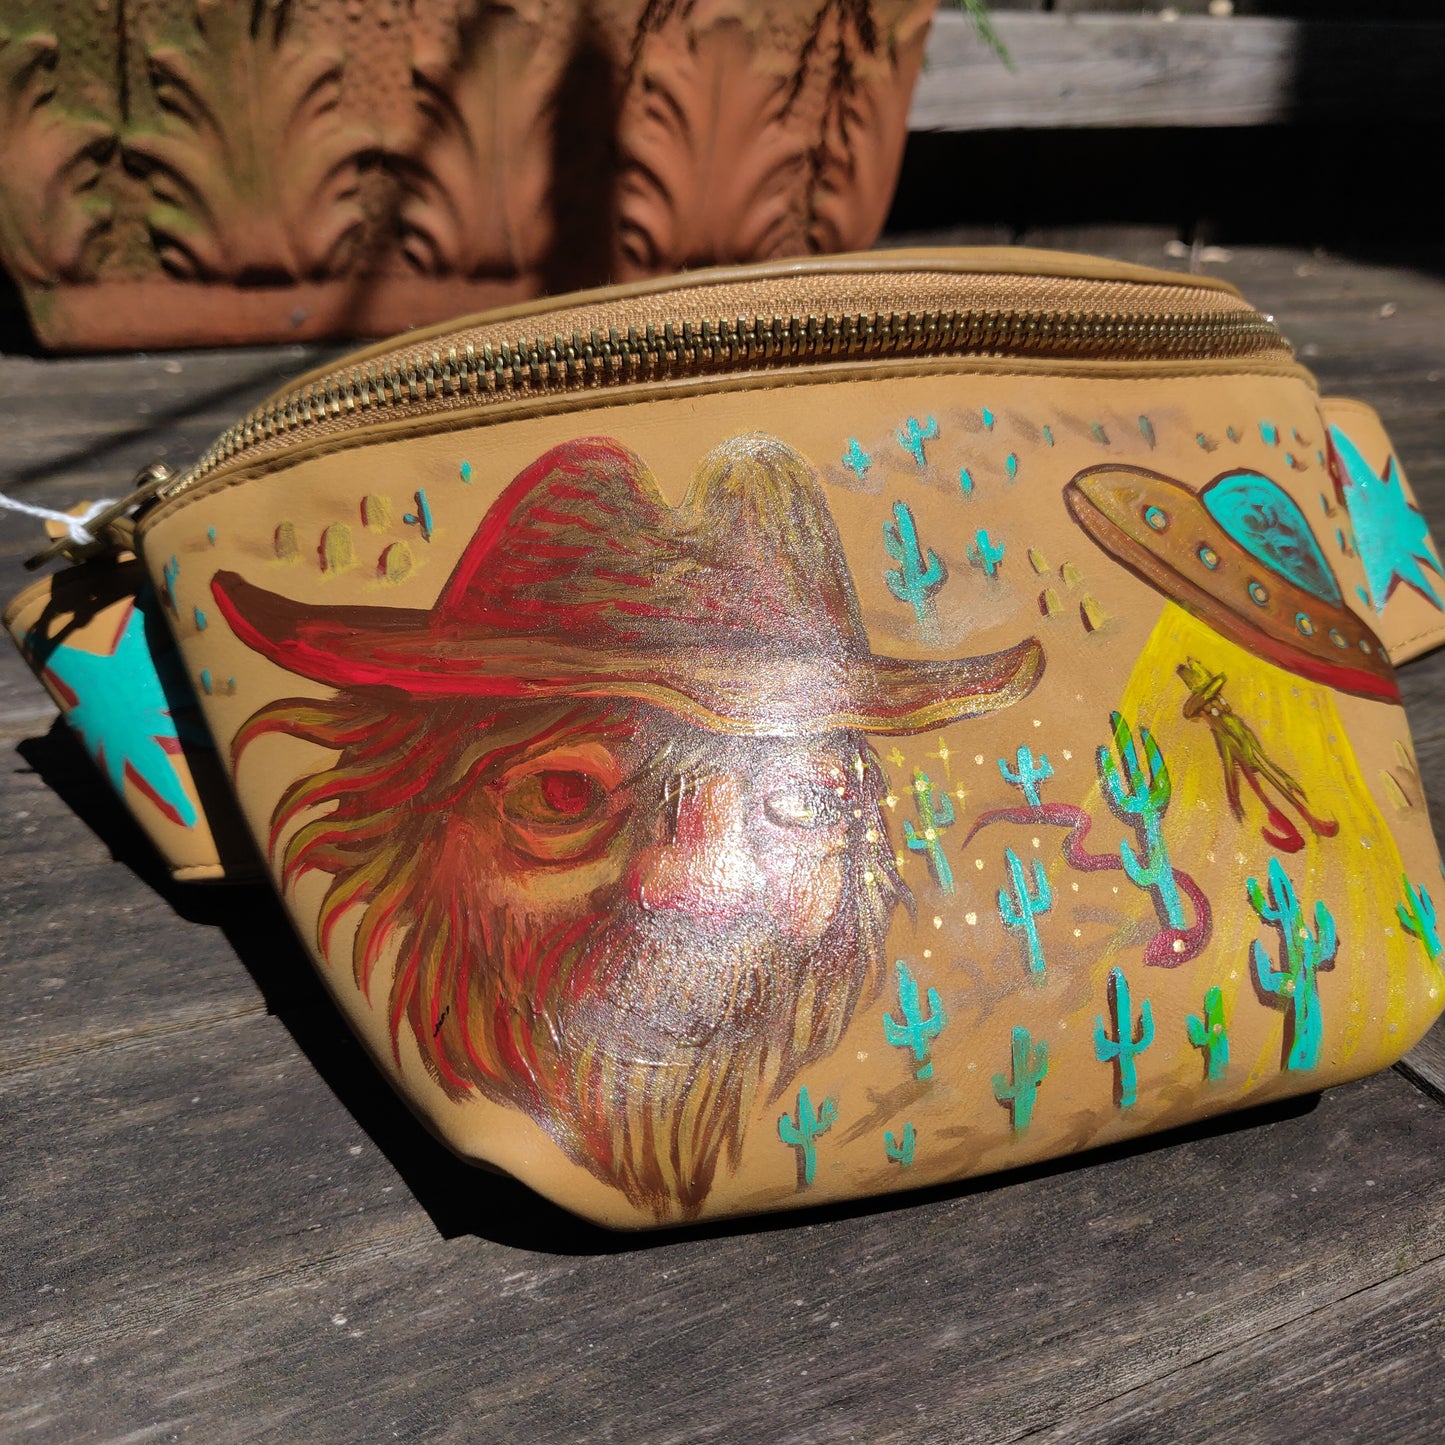 The Abduction of Jim Hand-painted FANNY PACK